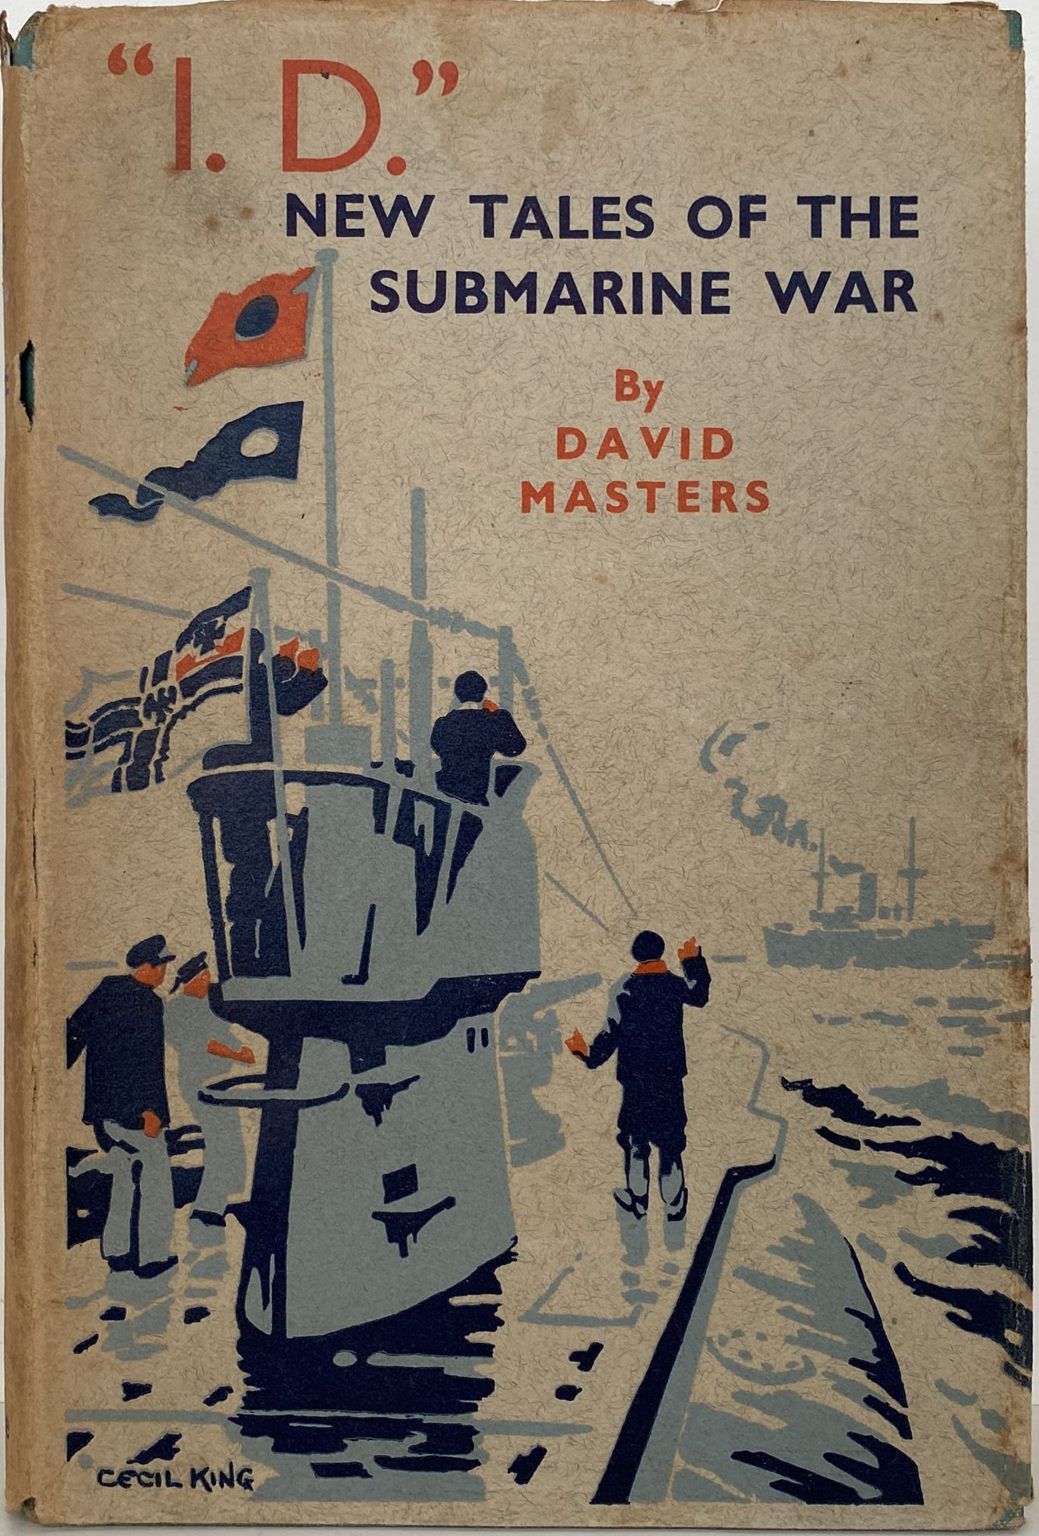 I.D. NEW TALES OF THE SUBMARINE WAR